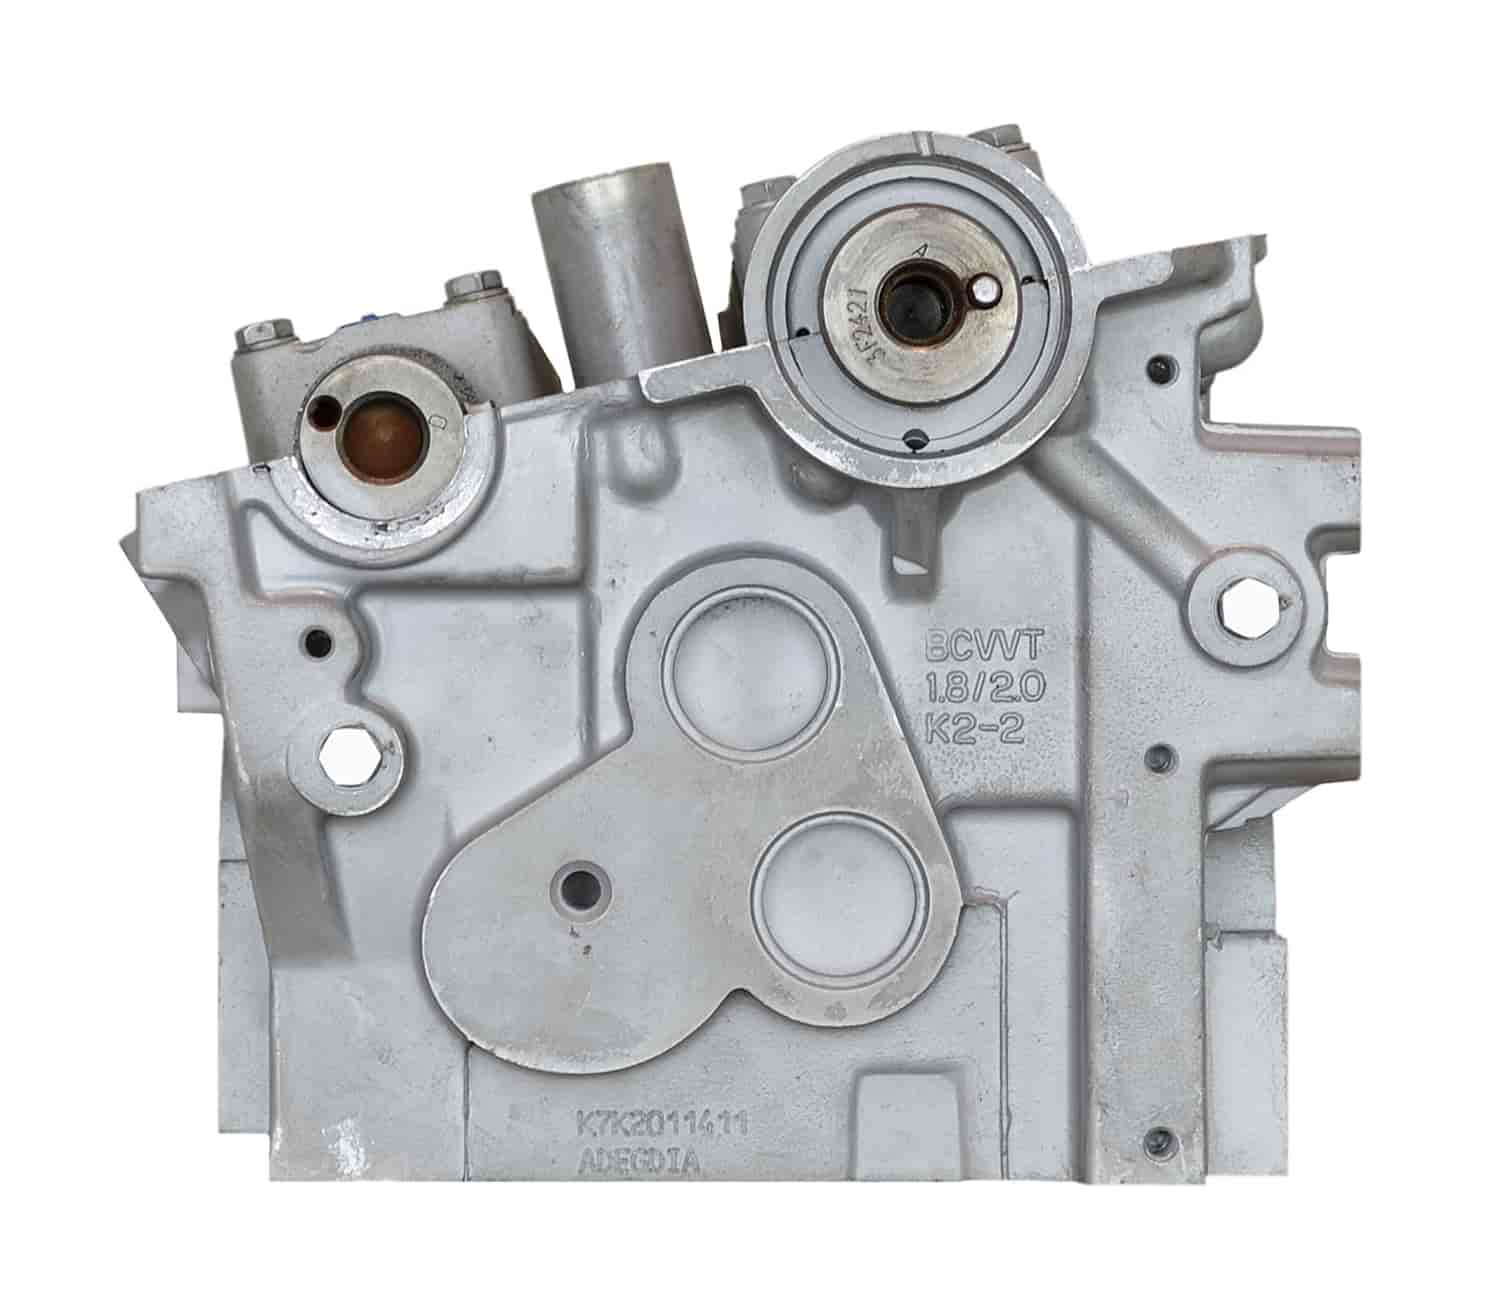 Remanufactured Cylinder Head for 2006-2010 Hyundai with 2.0L